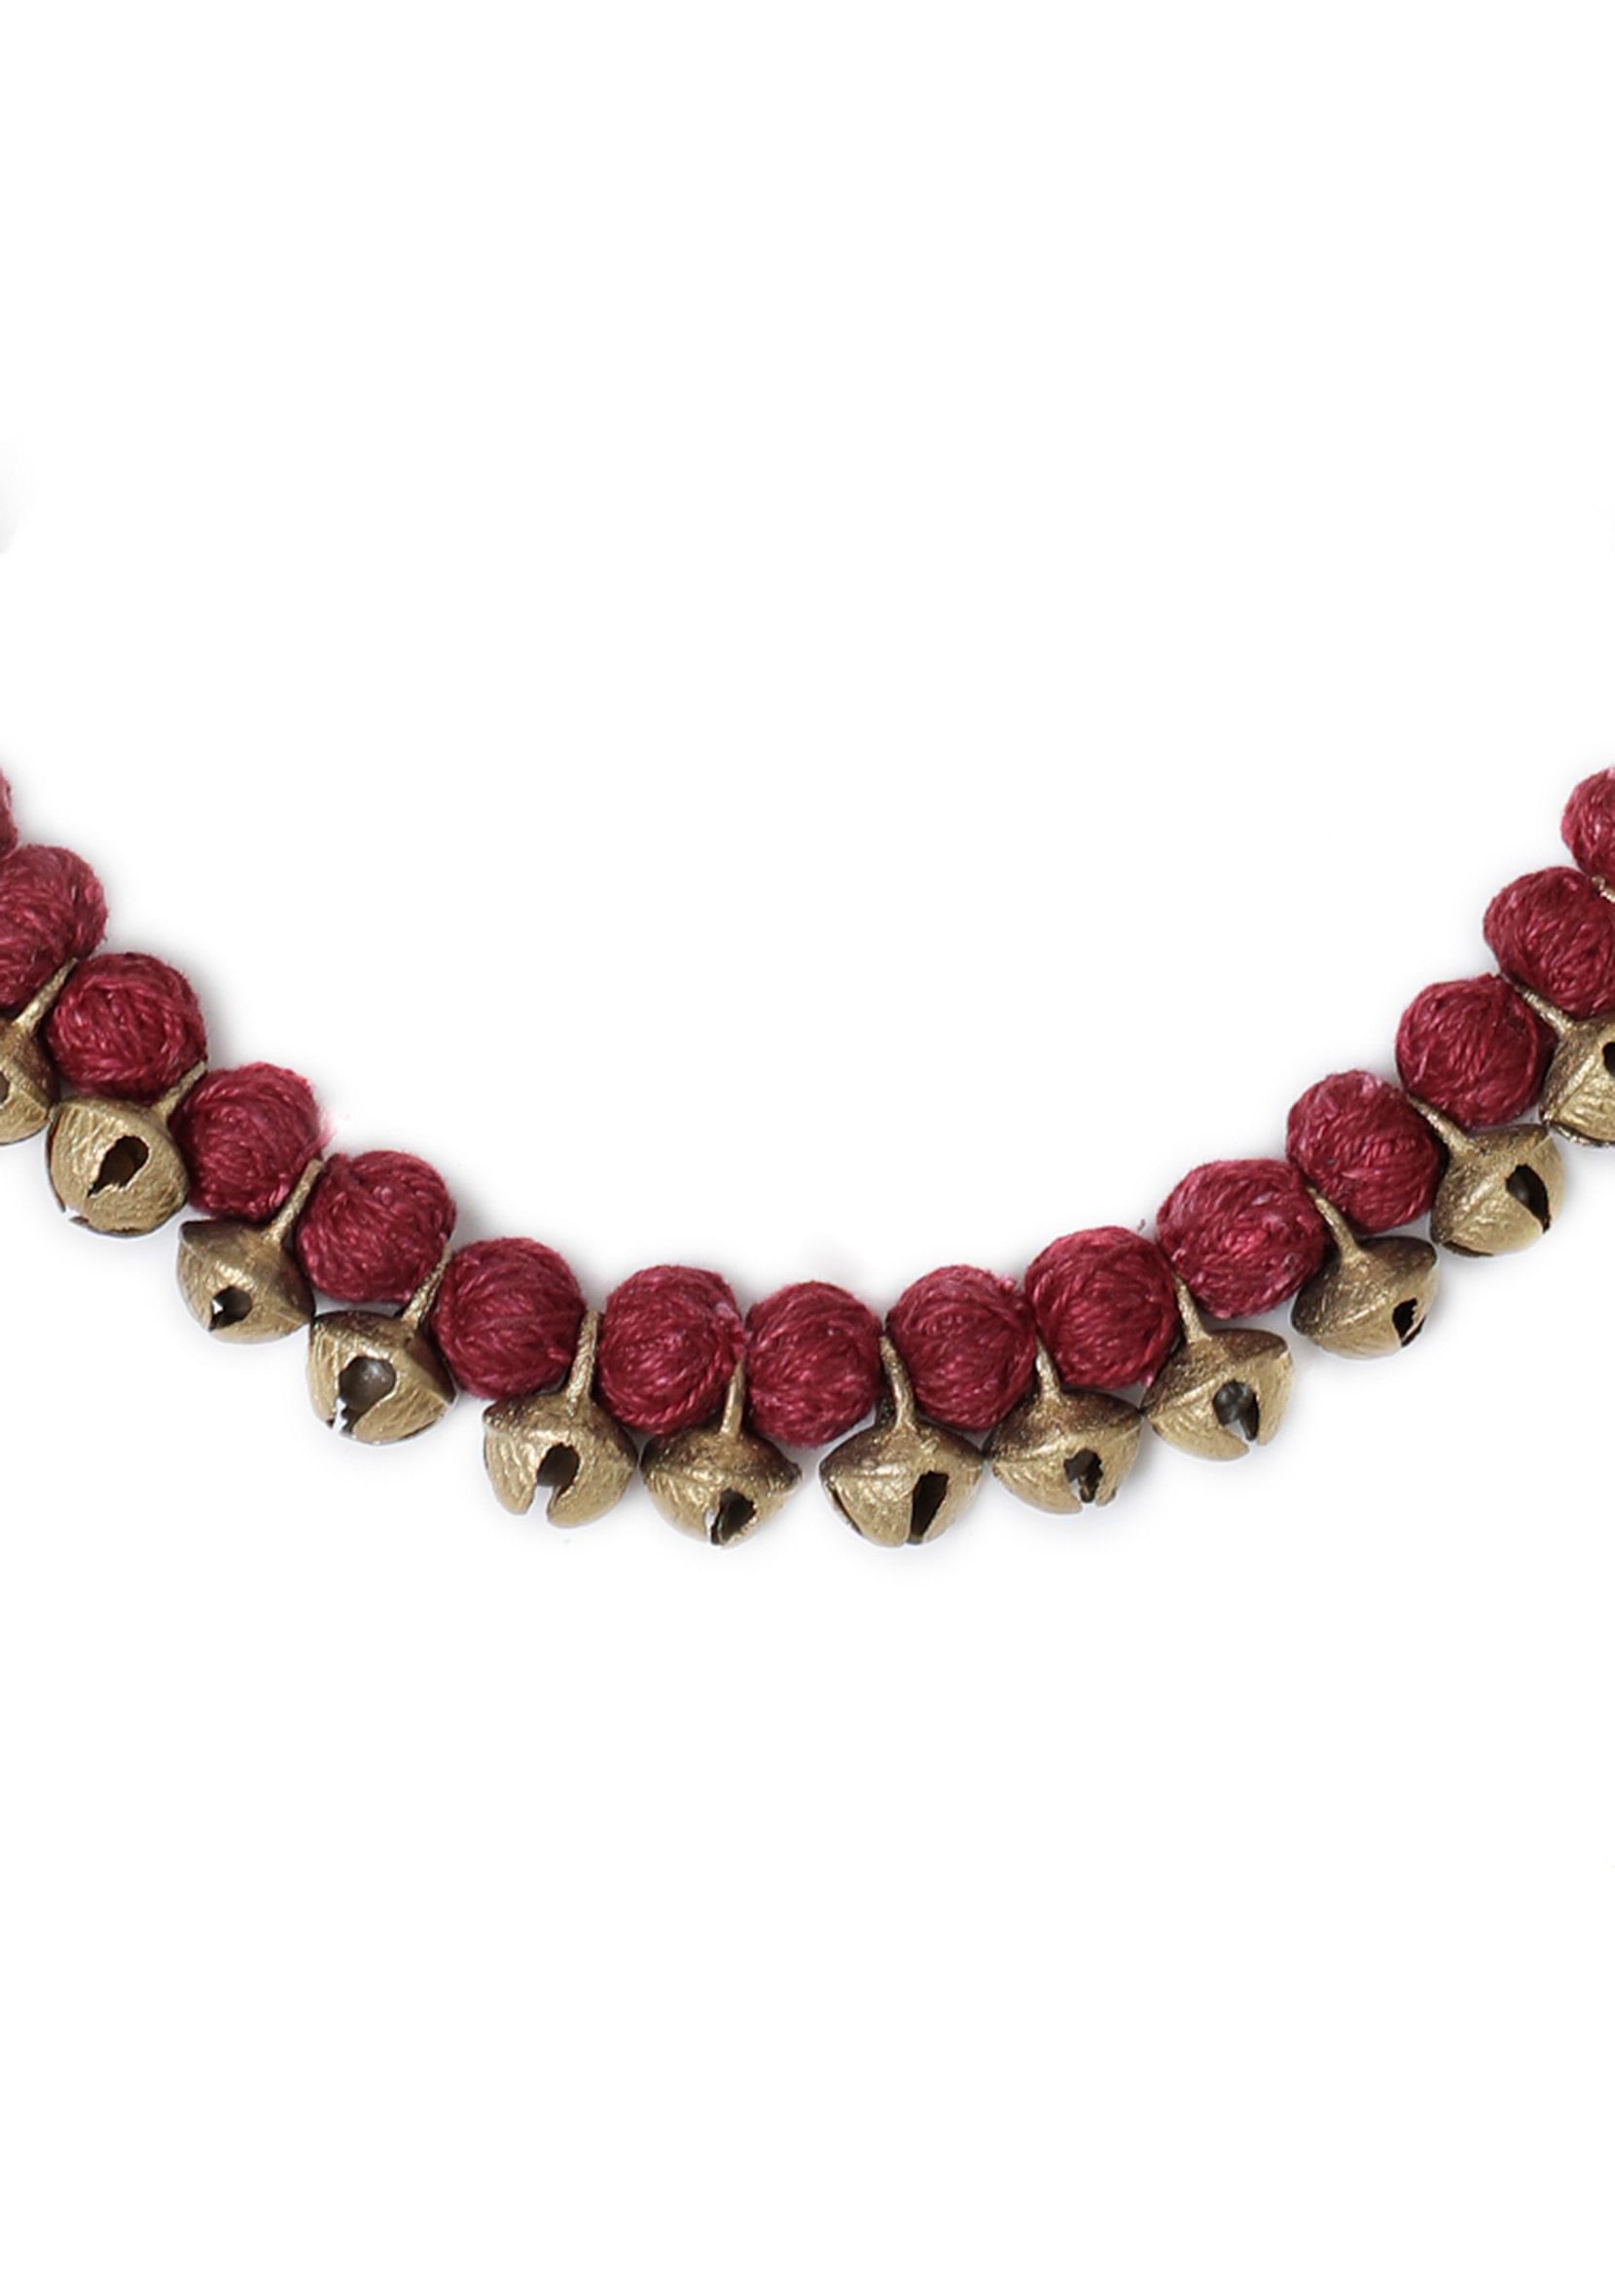 Red and Gold Ghungroo Tribal Necklace